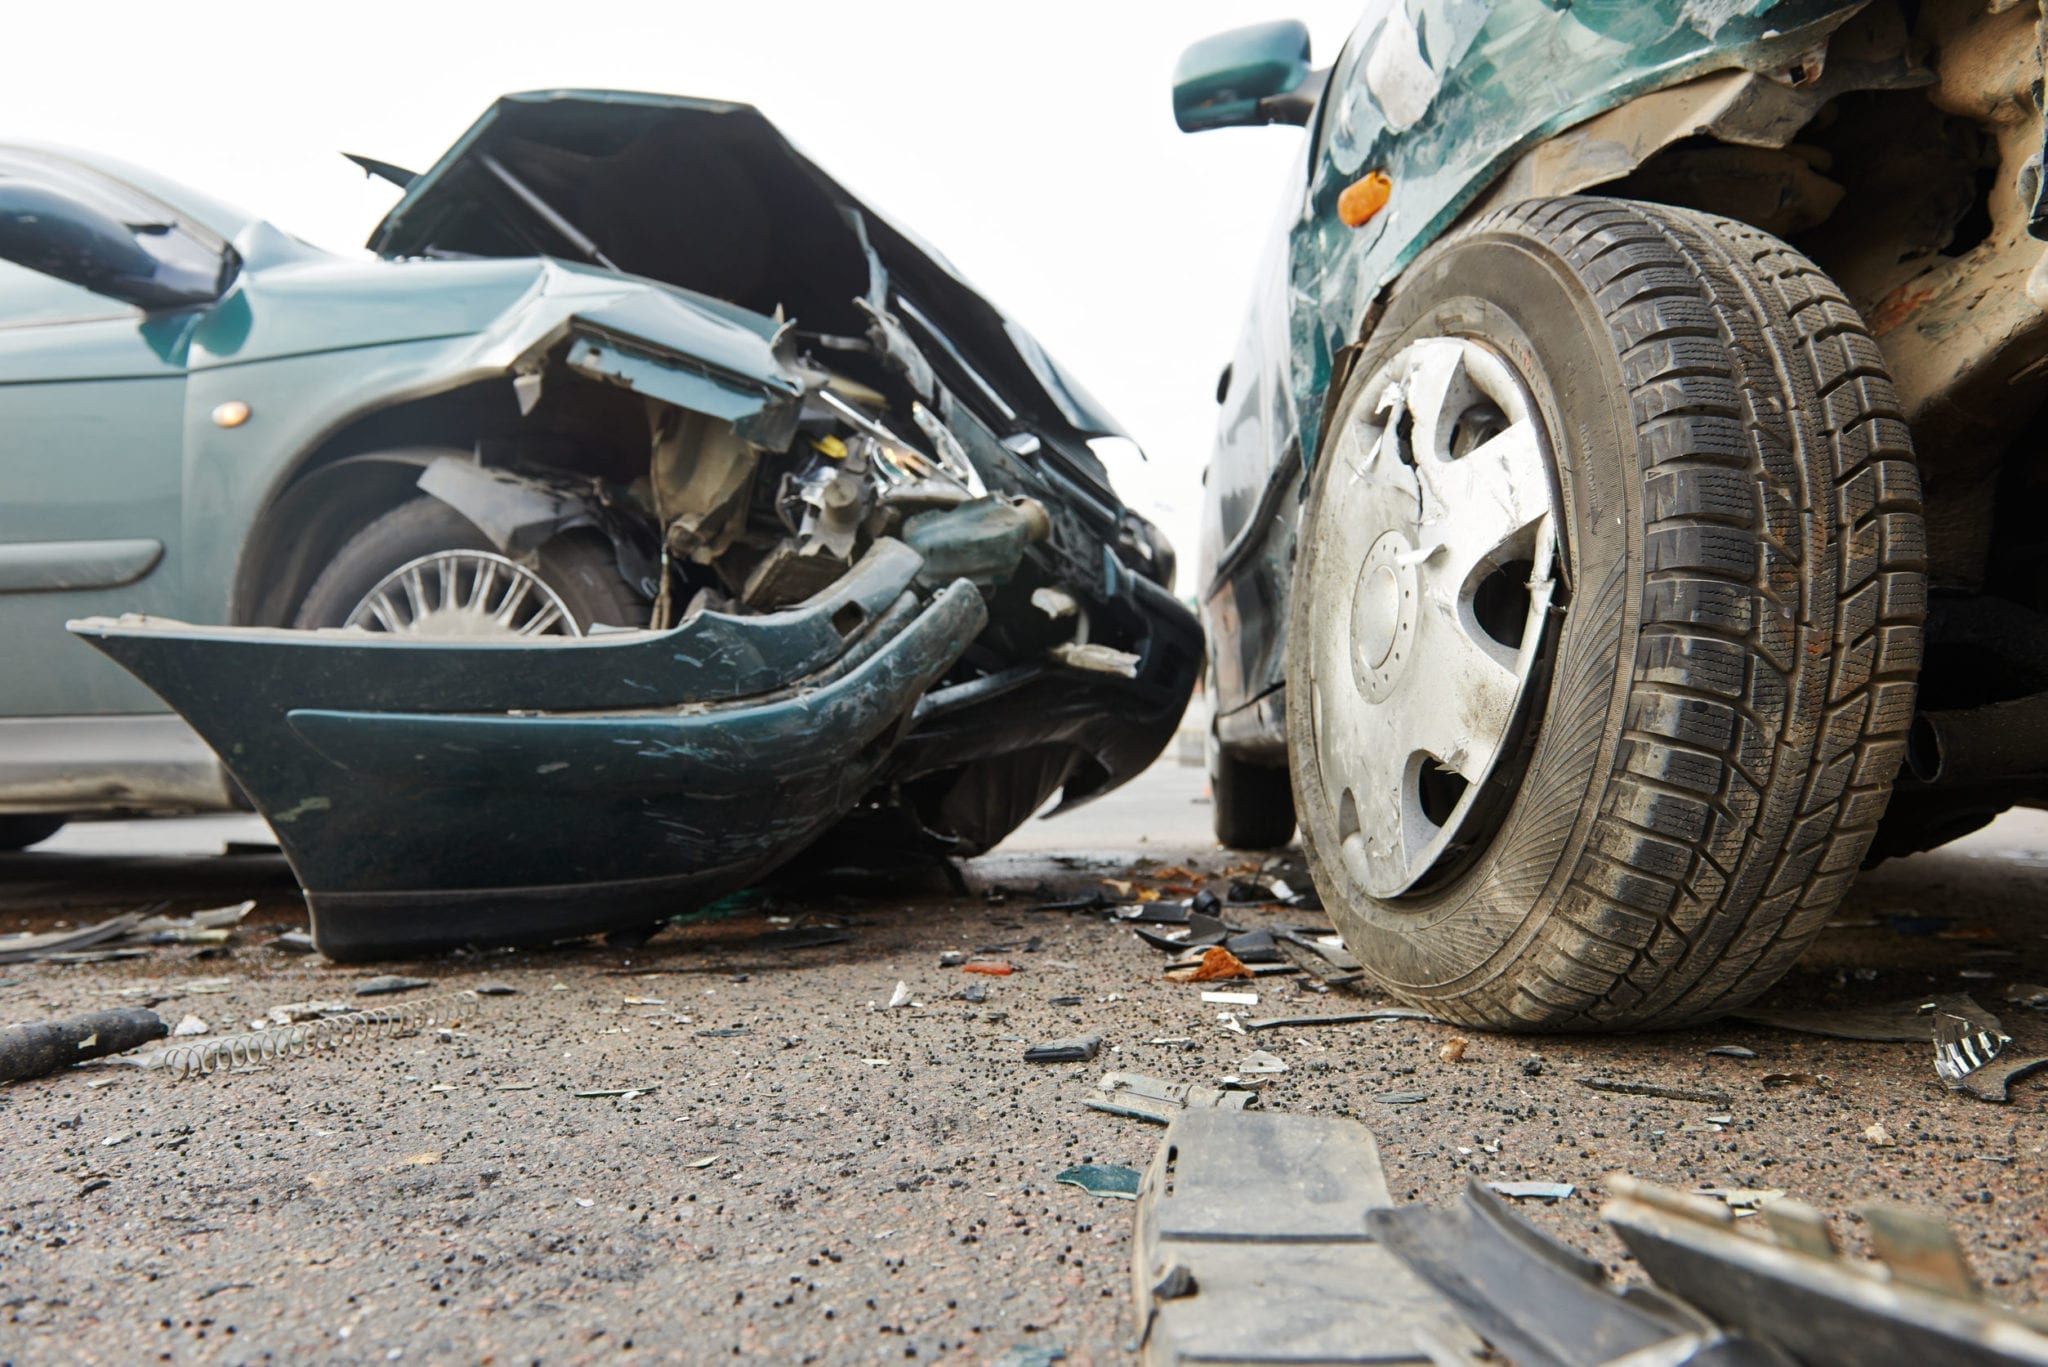 You Just Got into a Car Crash in Florida – What Now?